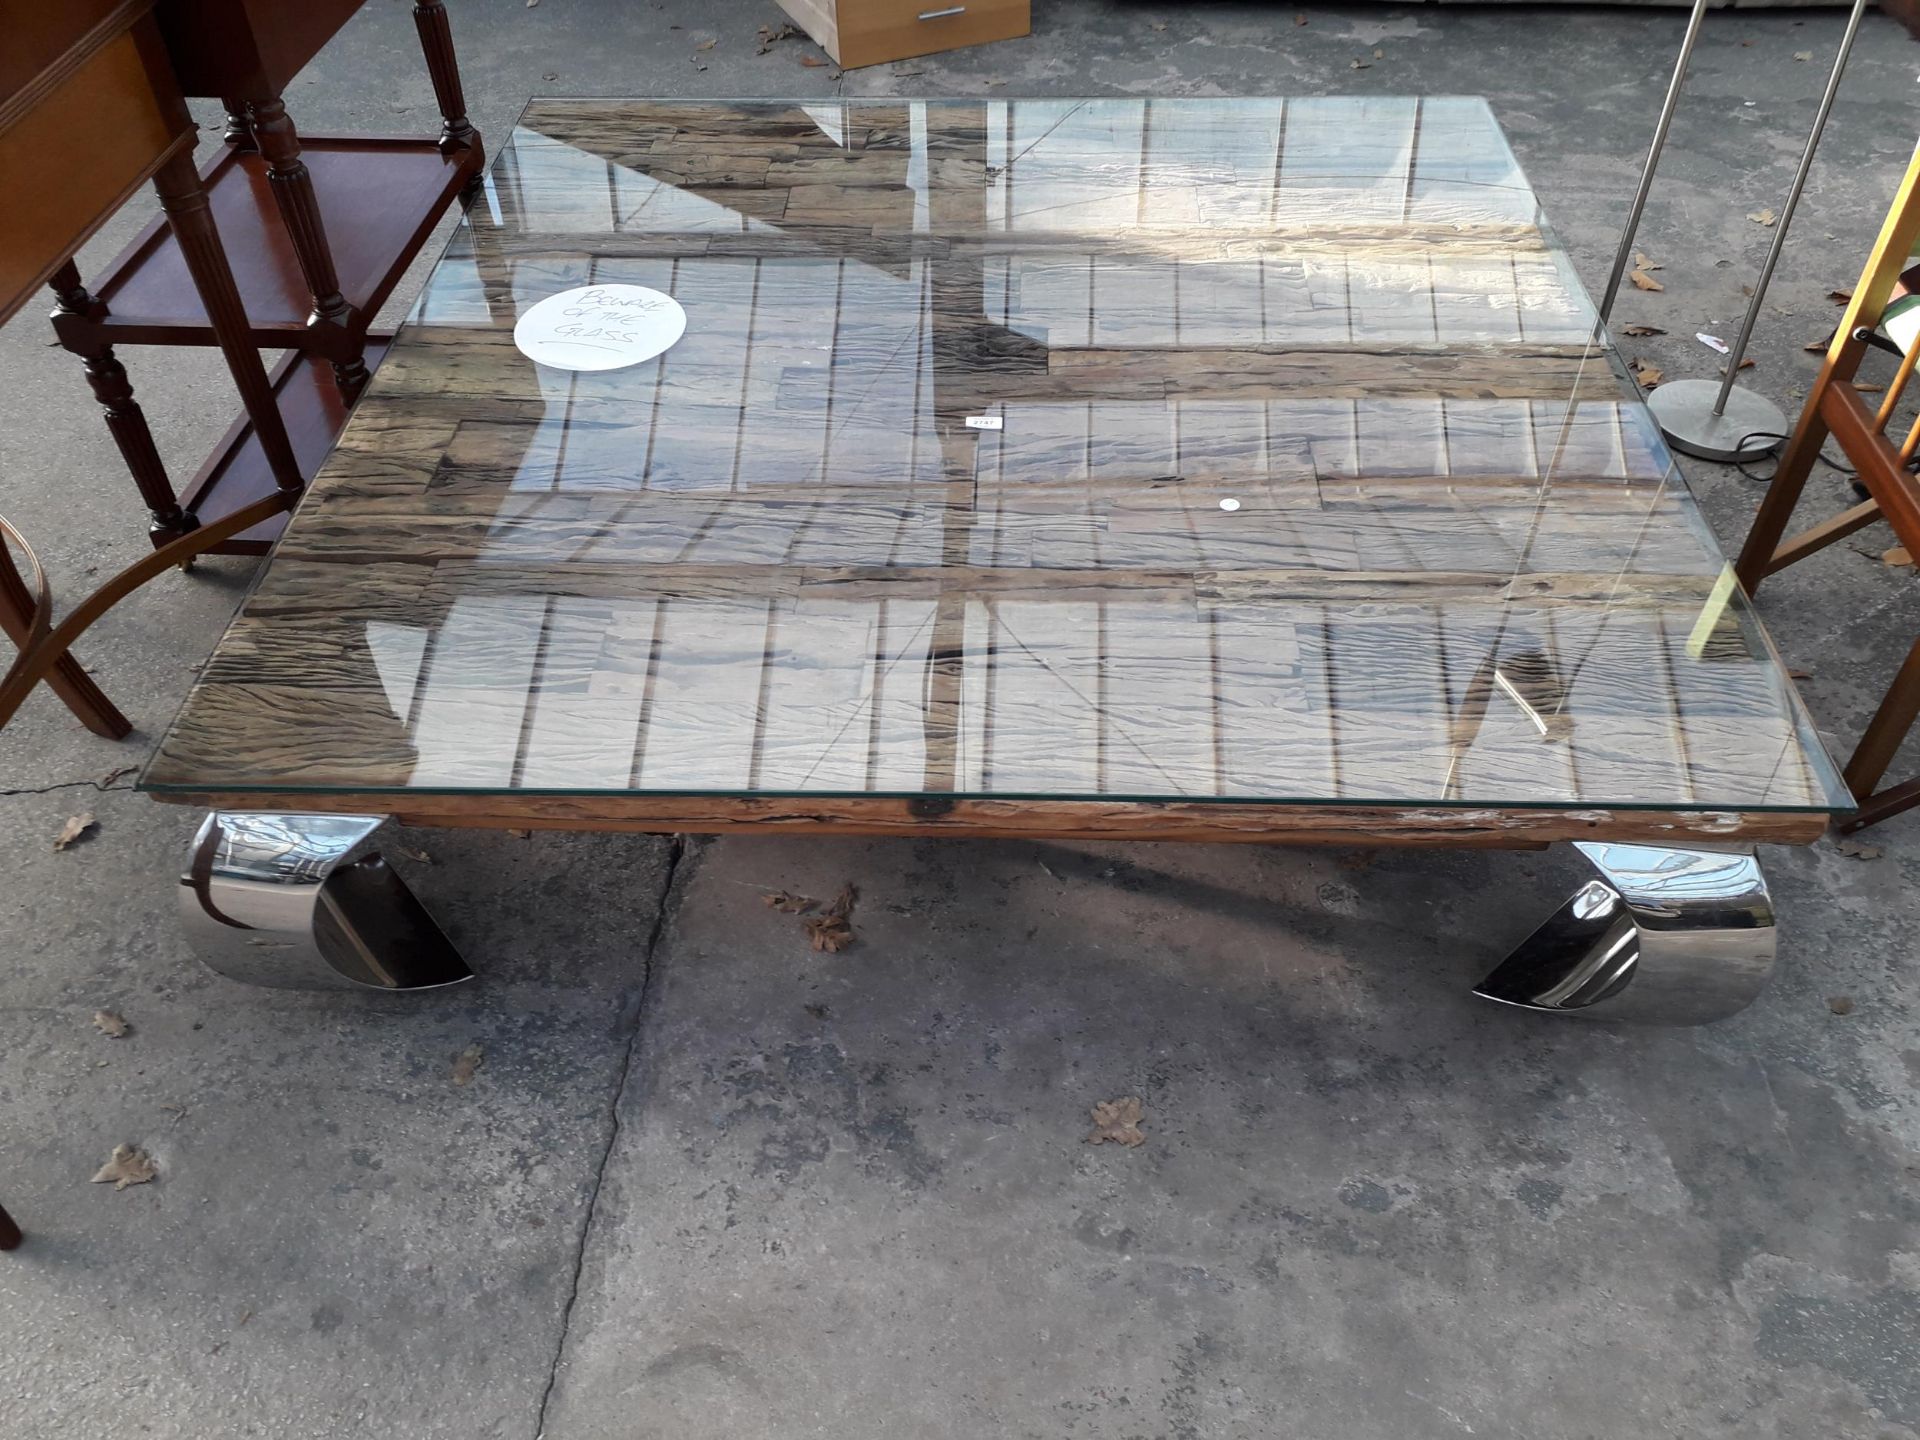 A RUSTIC COFFEE TABLE WITH RECLAIMED WOOD TOP ON SWEPT CHROMIUM PLATED LEGS, 55" SQUARE